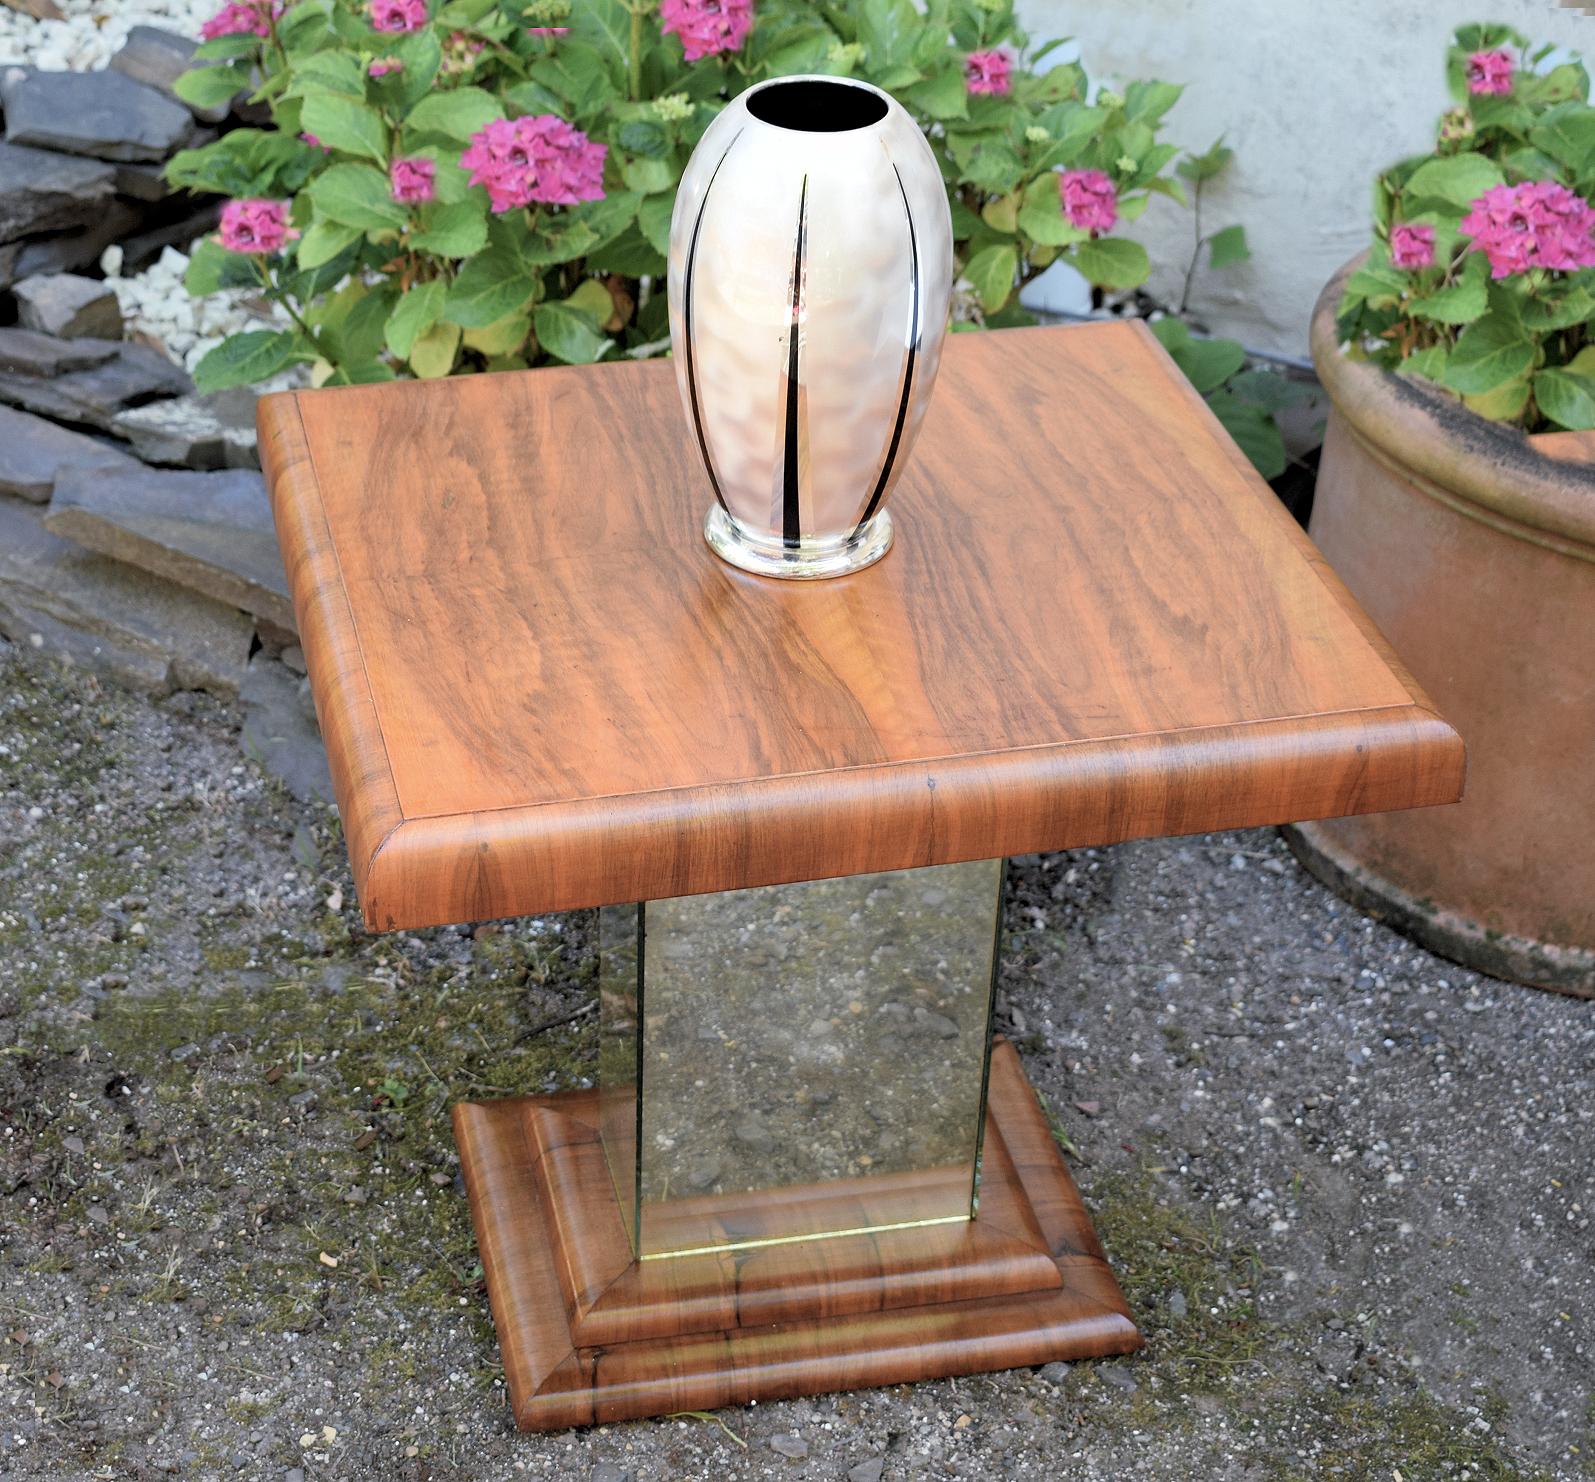 Very stylish Art Deco English modernist table dating to the 1930s. A very fine example that can be used for multiple settings. Fabulous quality with figured walnut veneers throughout. A mirrored column sets this piece off beautifully for that extra